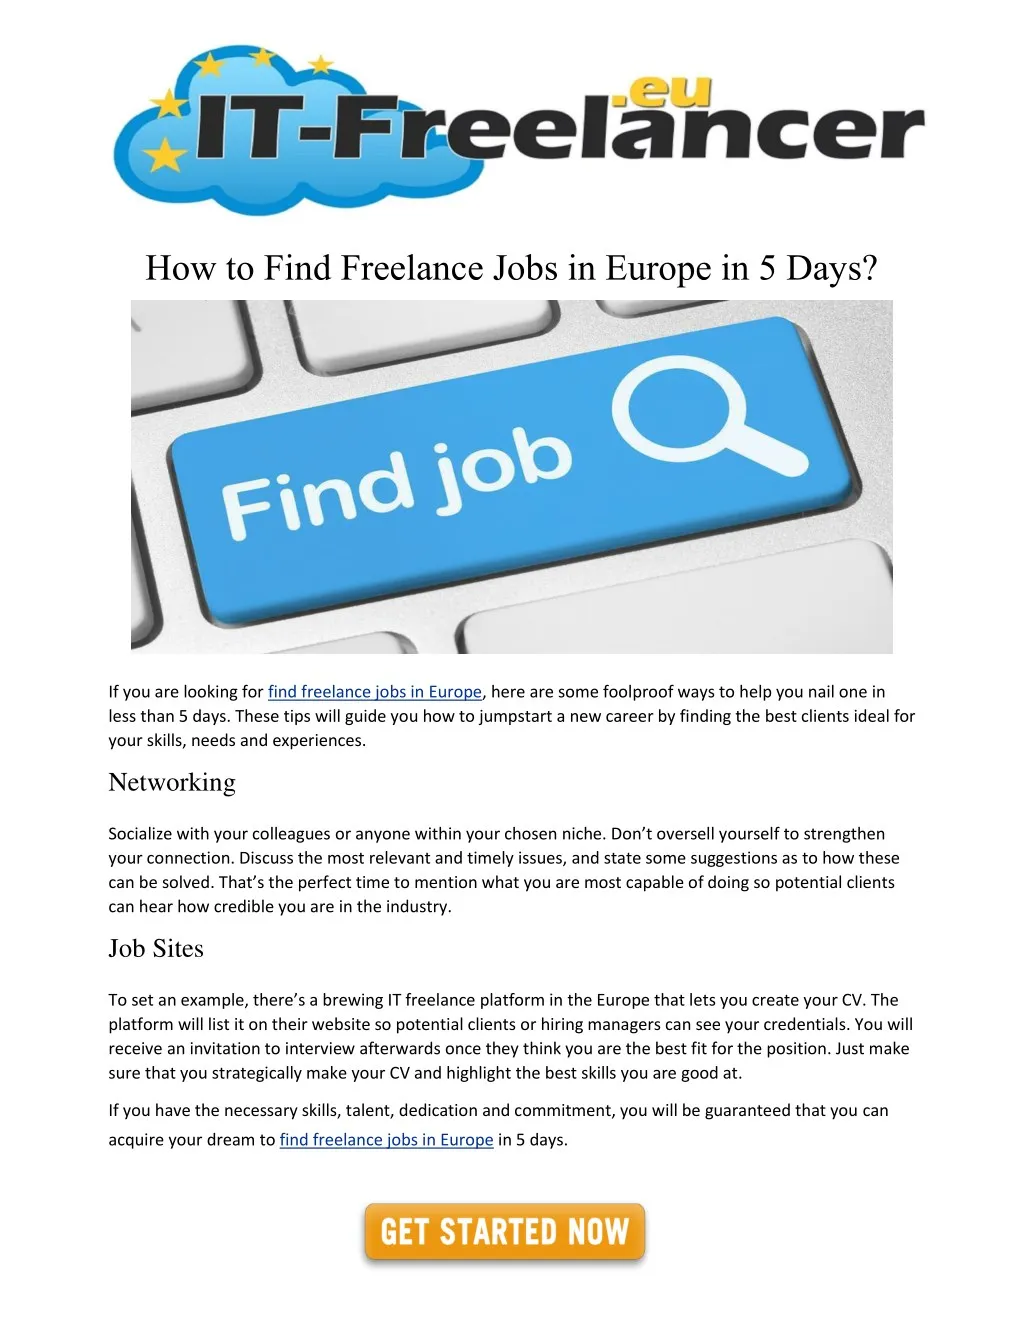 how to find freelance jobs in europe in 5 days